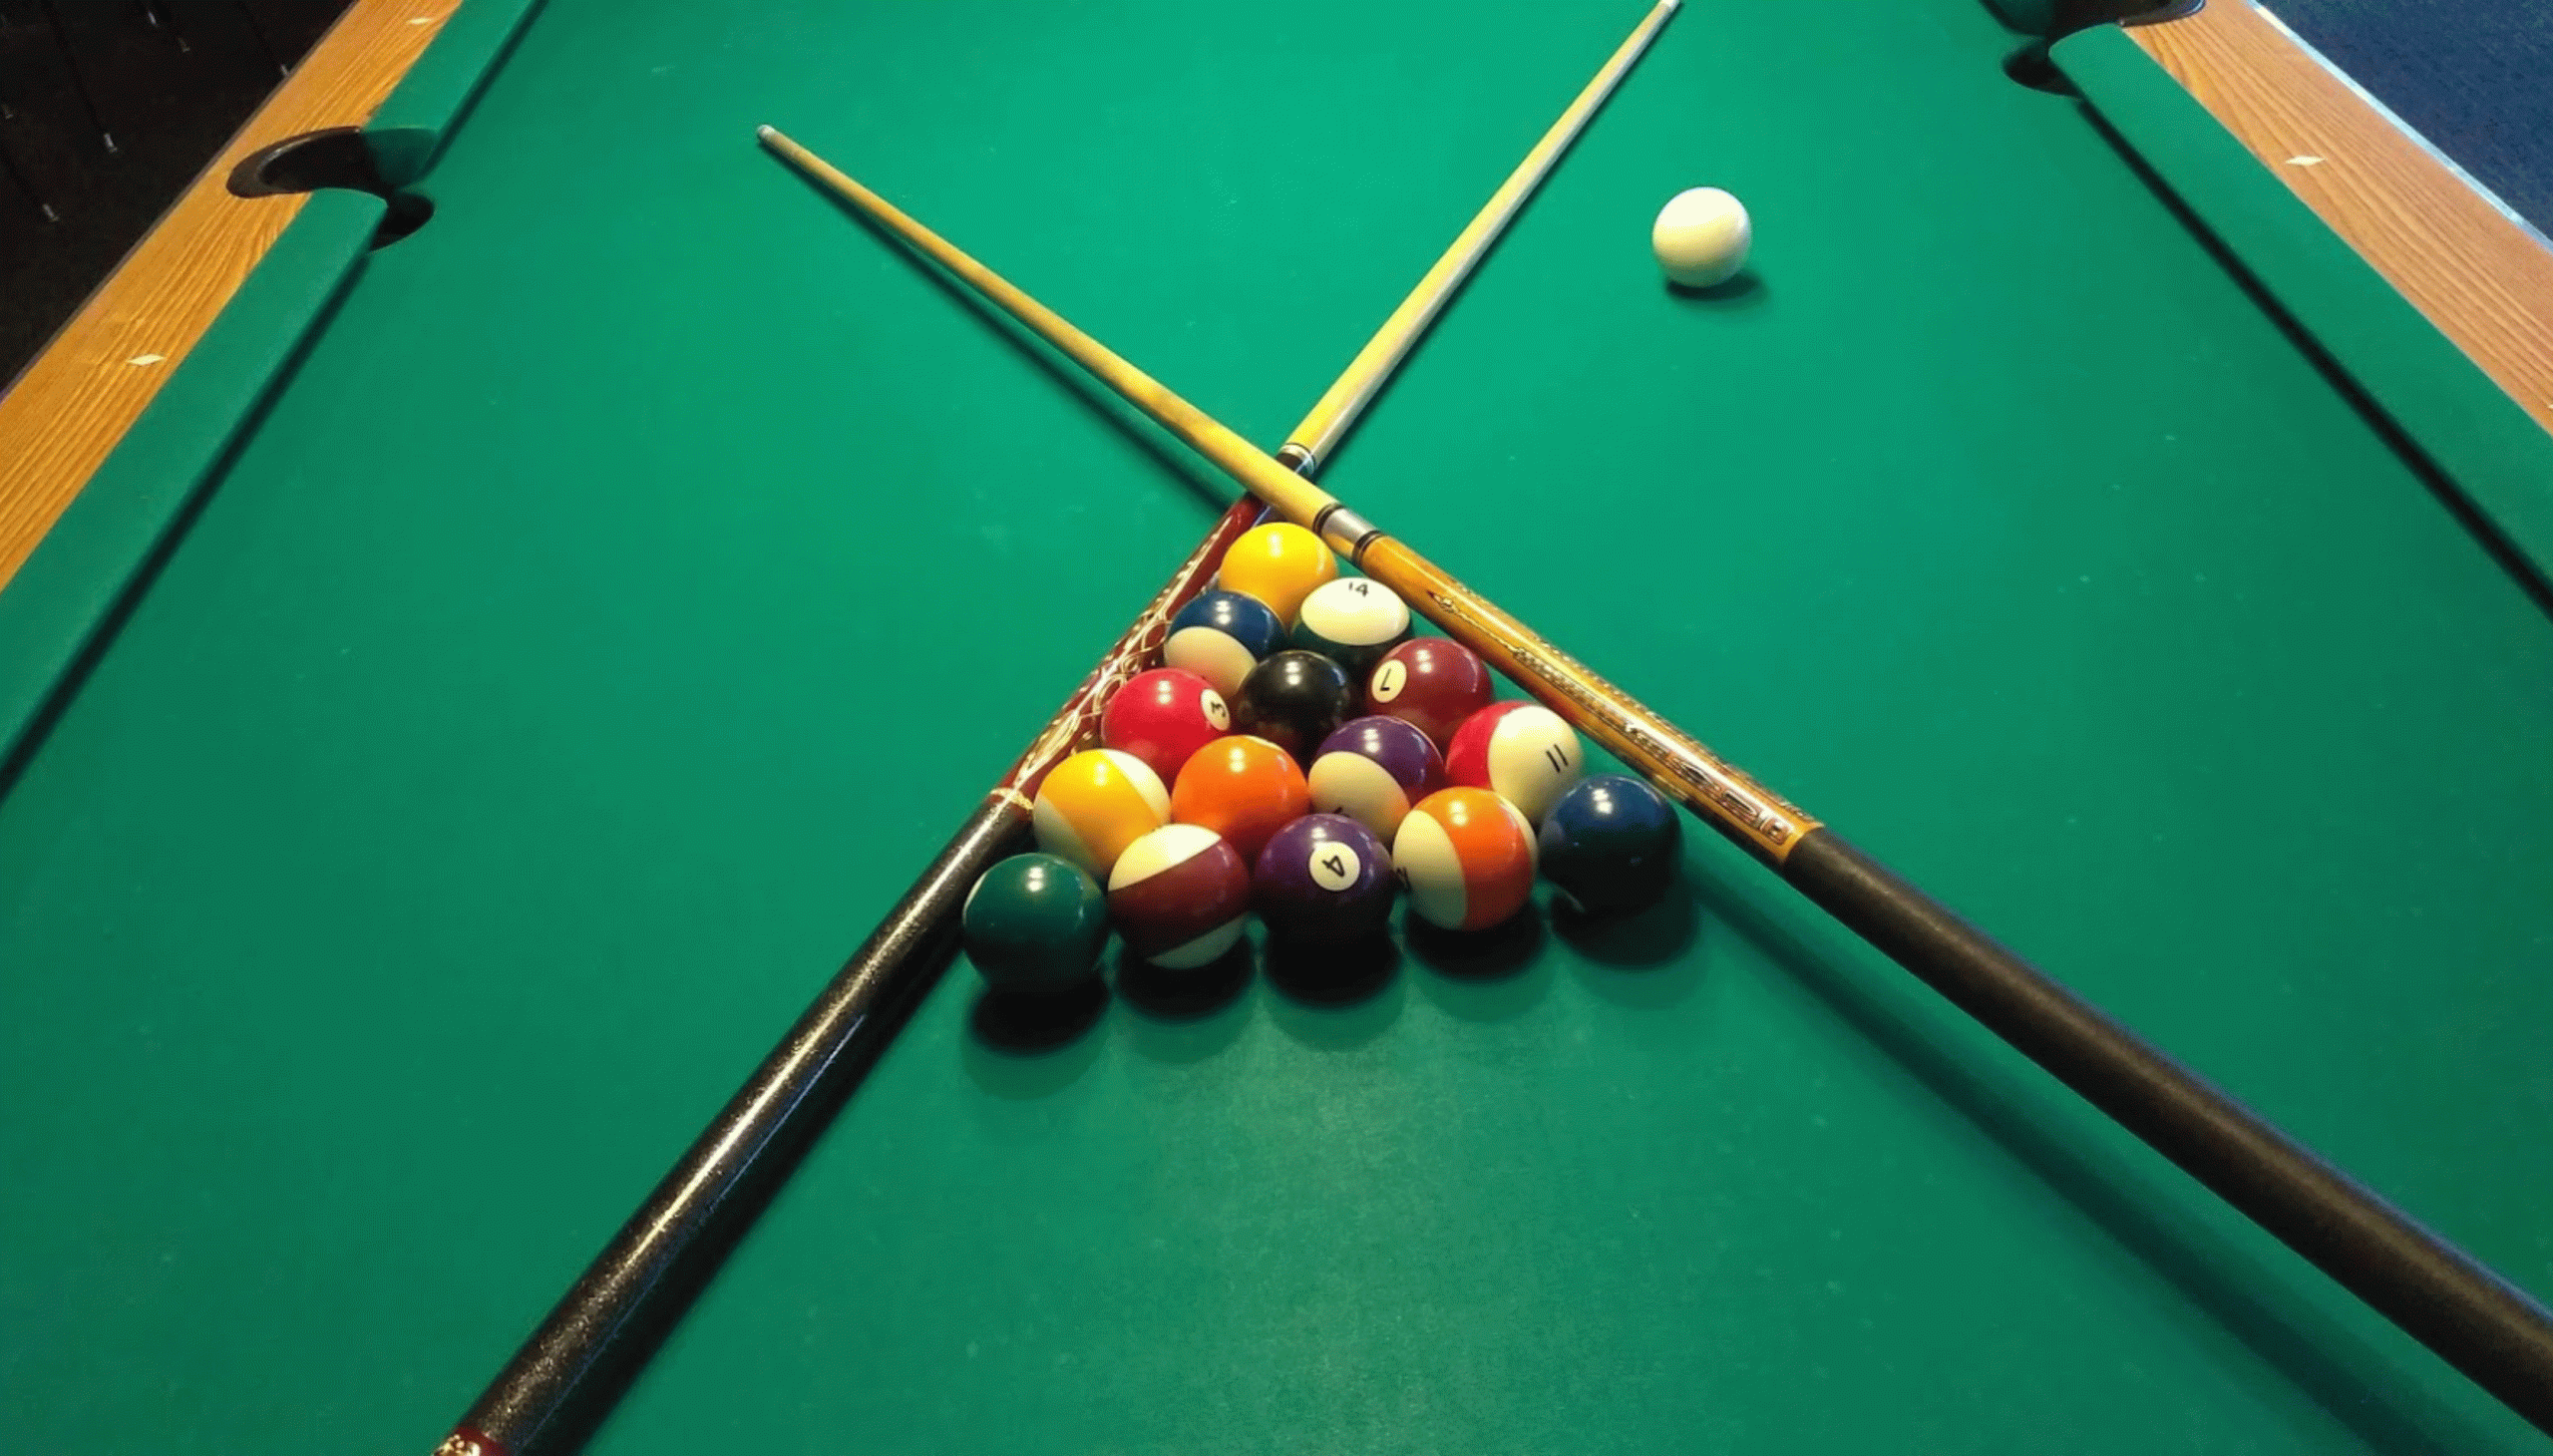 Pool balls racked with pool cues